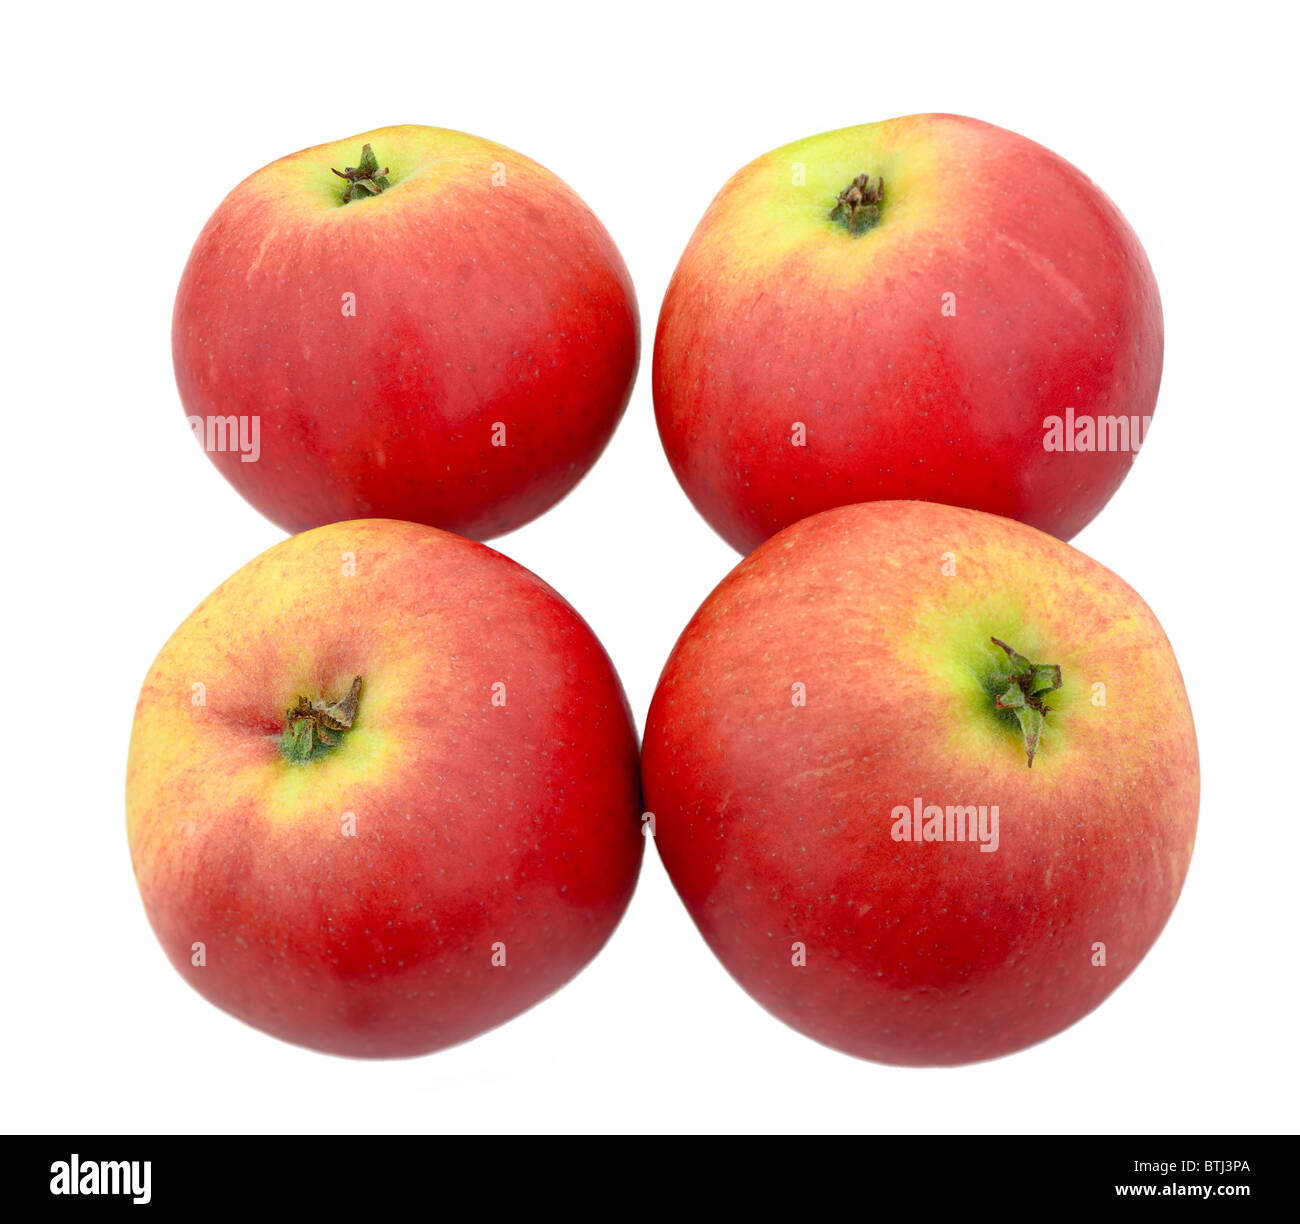 Four red gala apples with a green blush Stock Photo